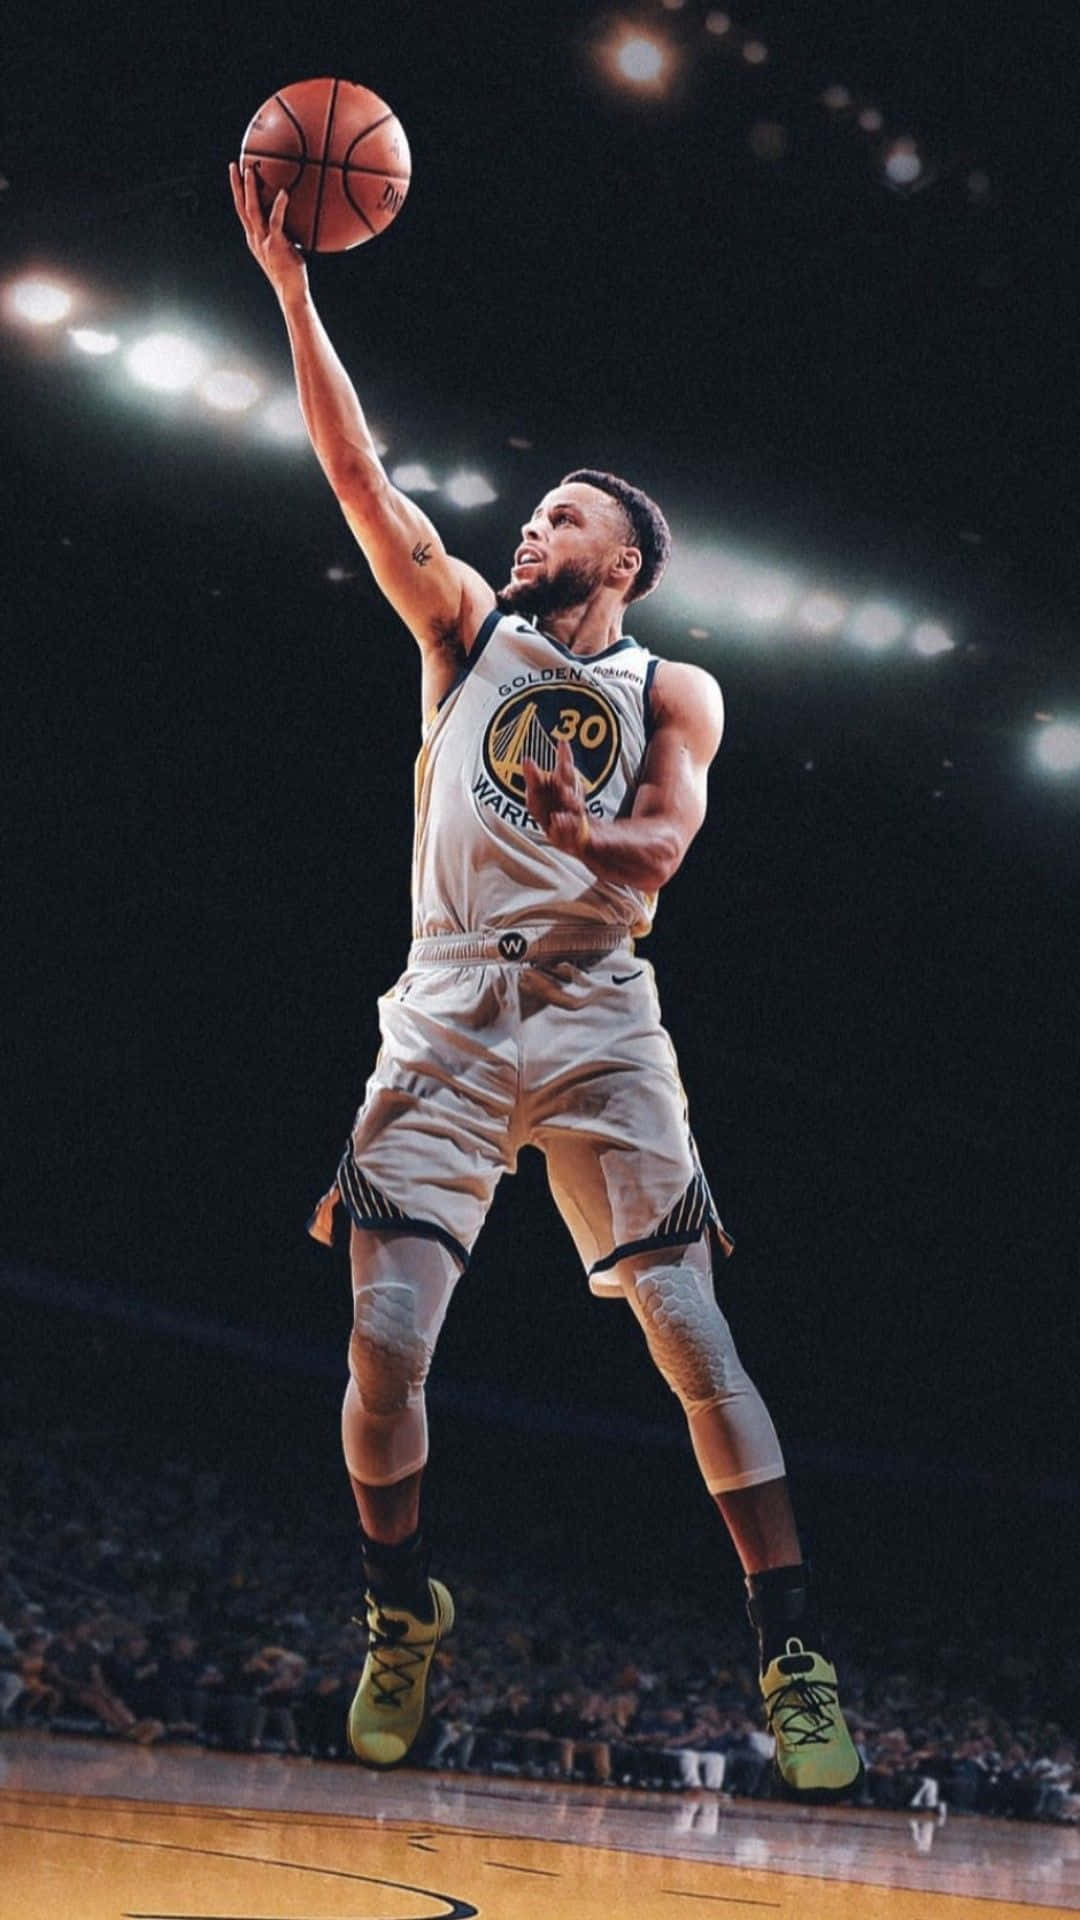 Bring The Aesthetics of Basketball With You! Wallpaper